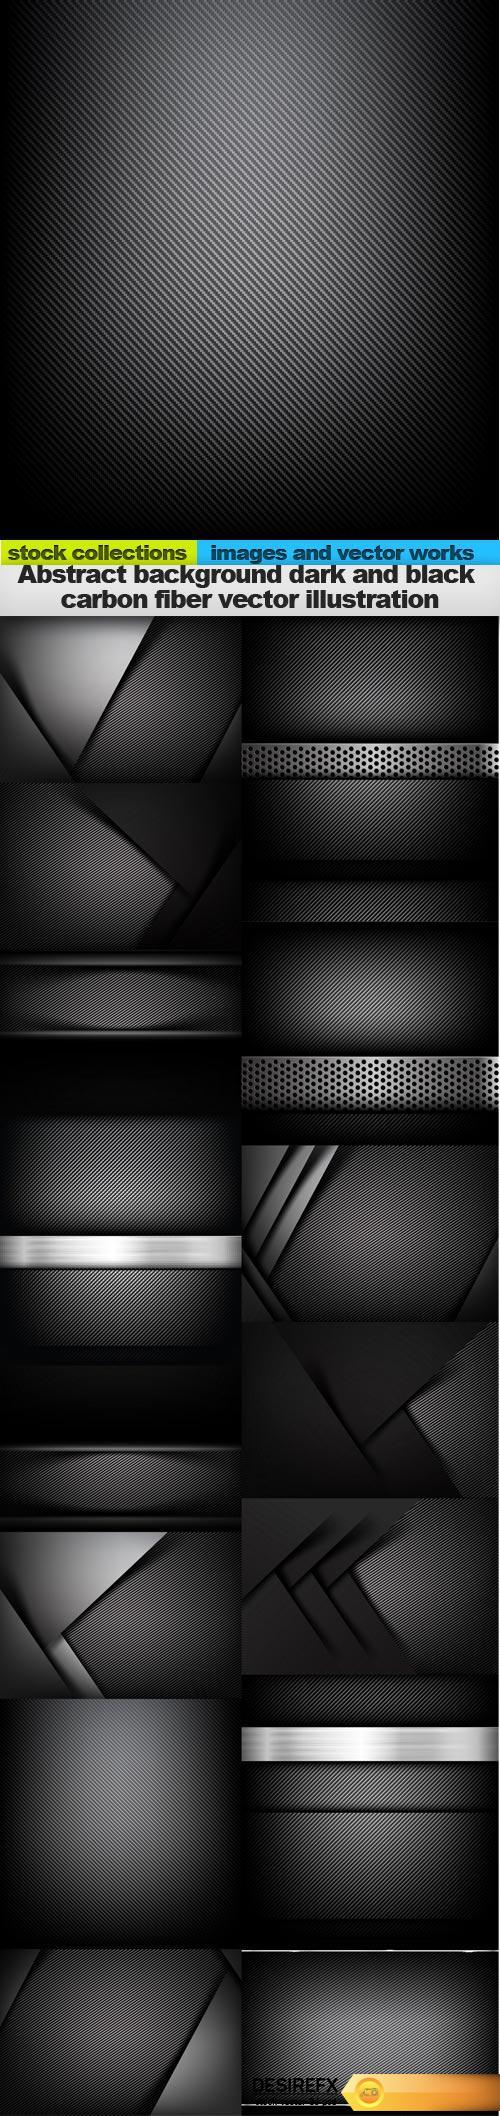 Abstract background dark and black carbon fiber vector illustration, 15 x EPS